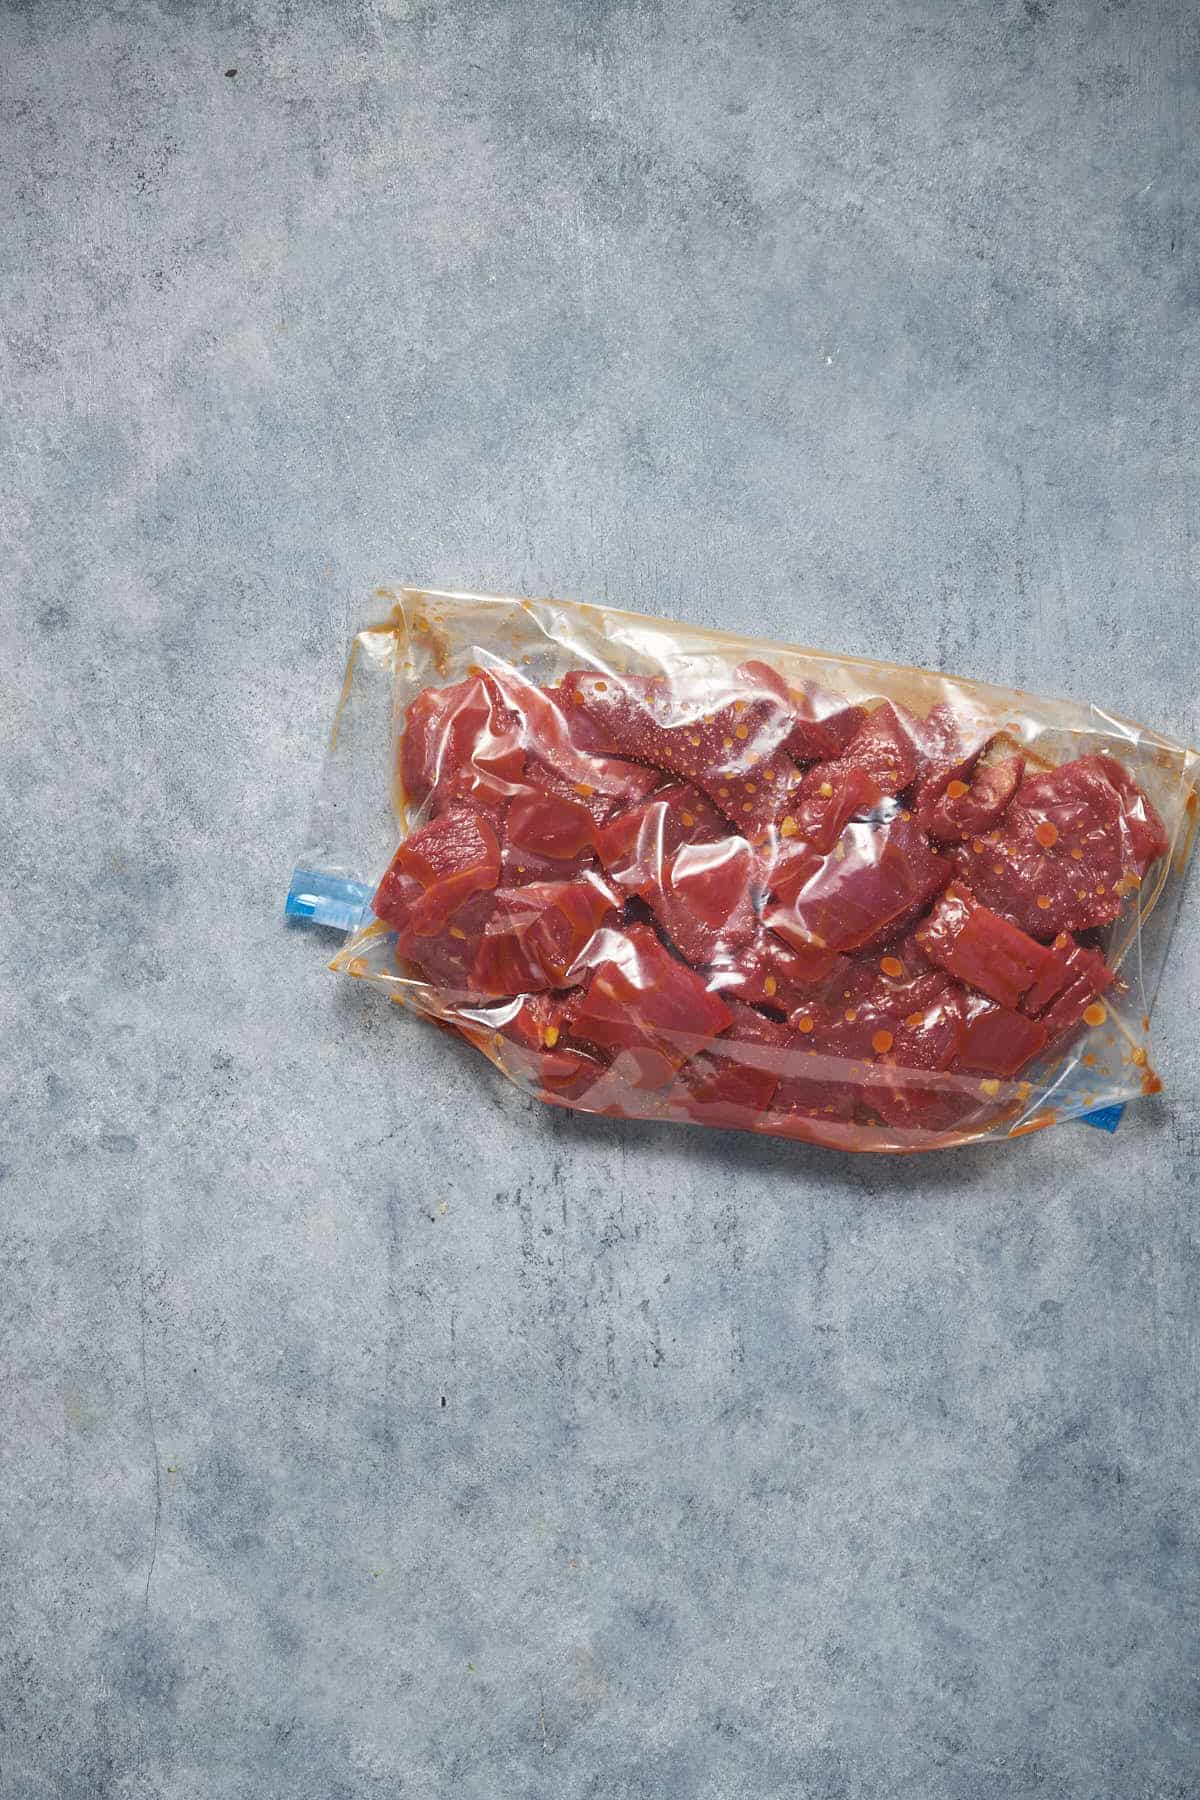 The meat with marinade in a ziplock bag.